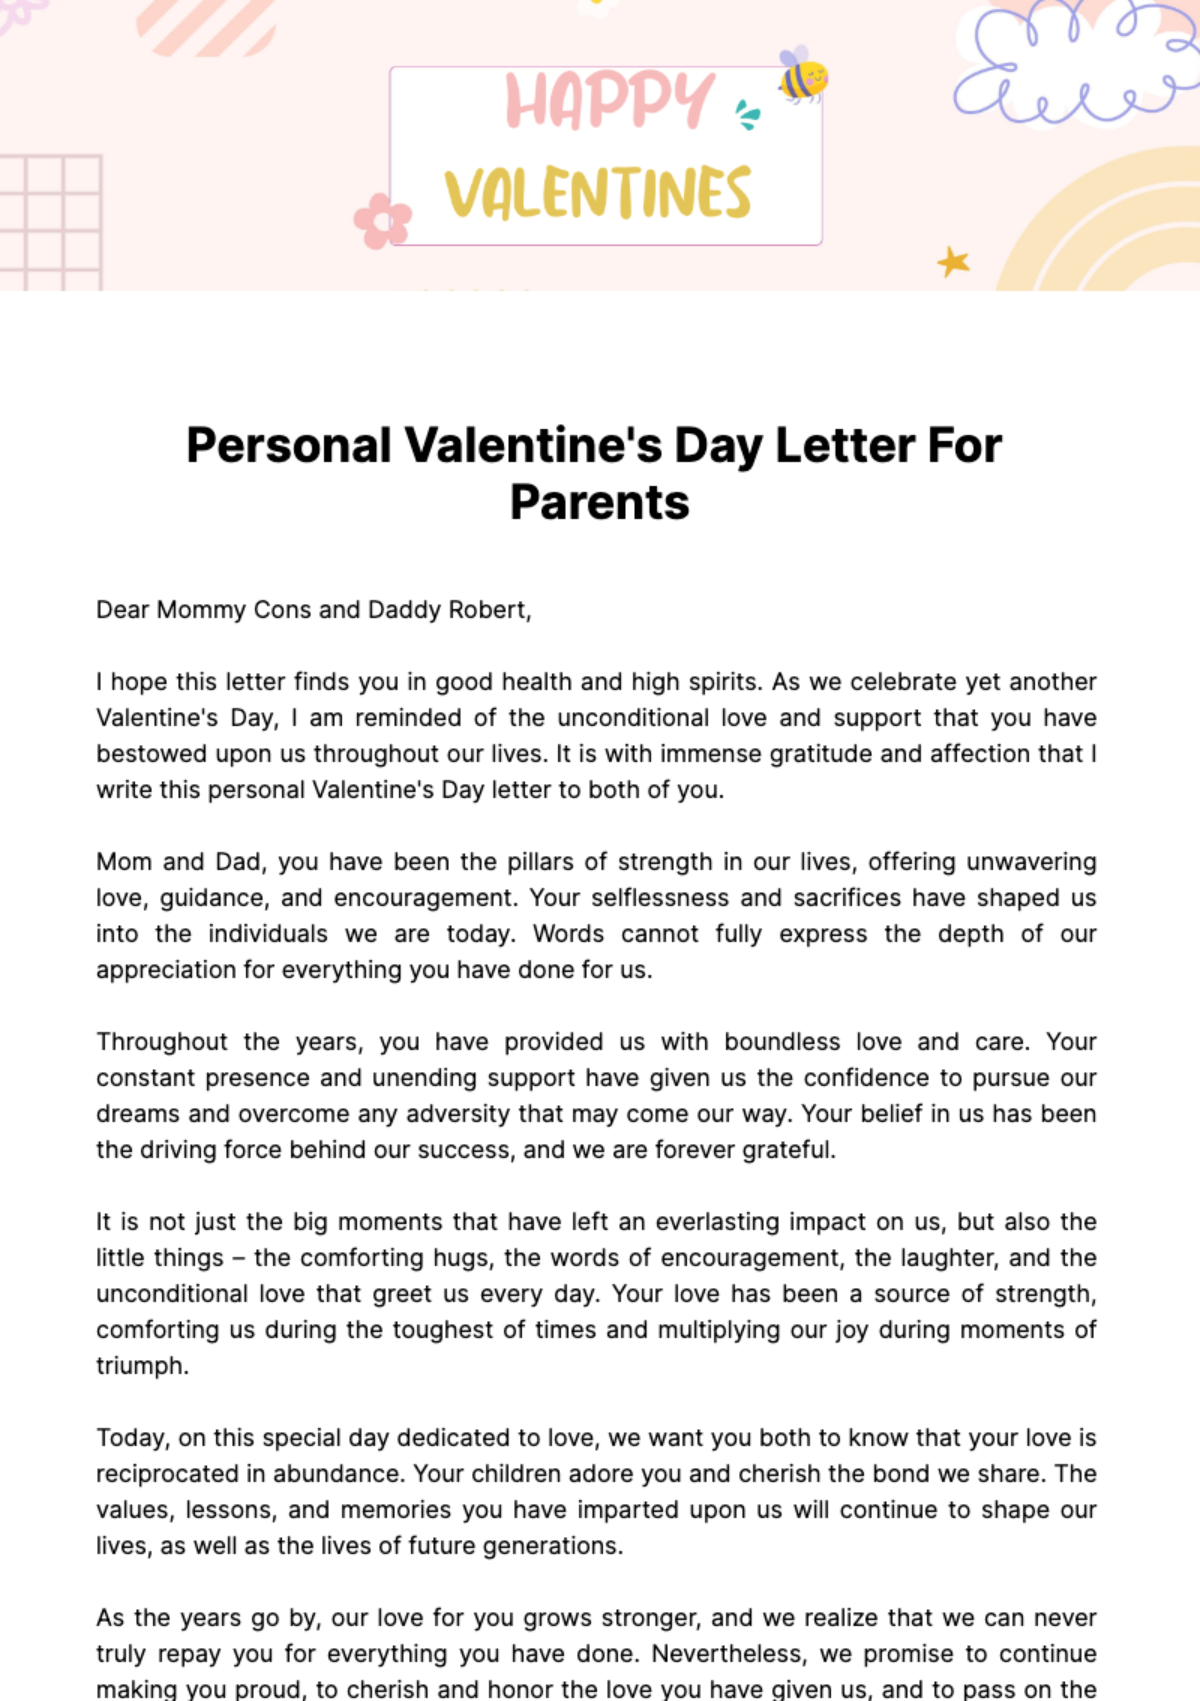 Personal Valentine's Day Letter for Parents Template